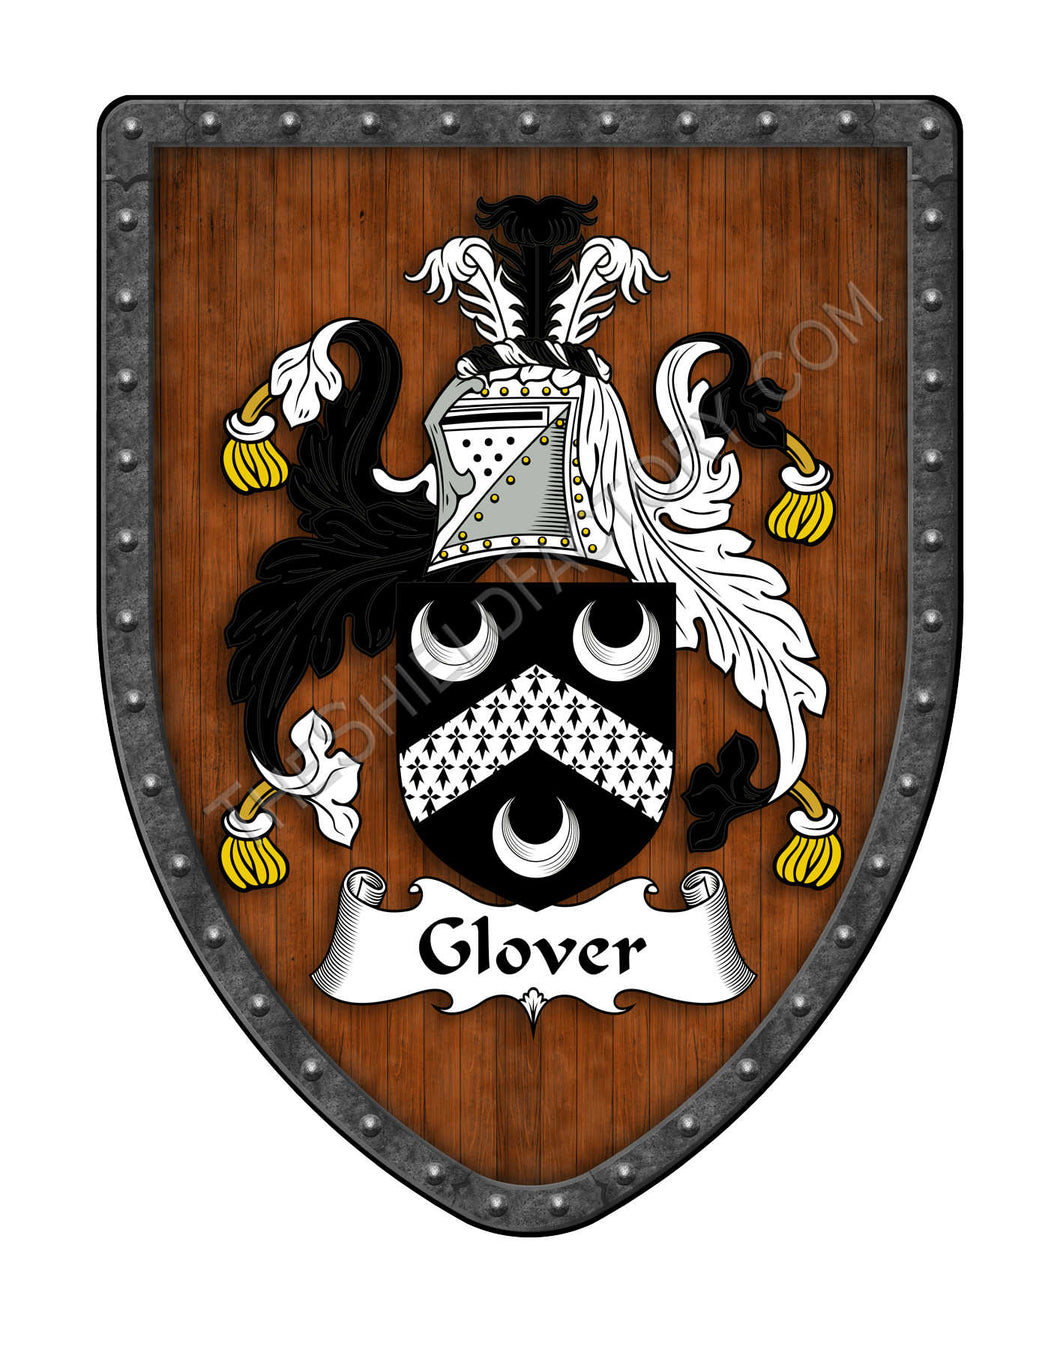 Glover Coat of Arms Shield